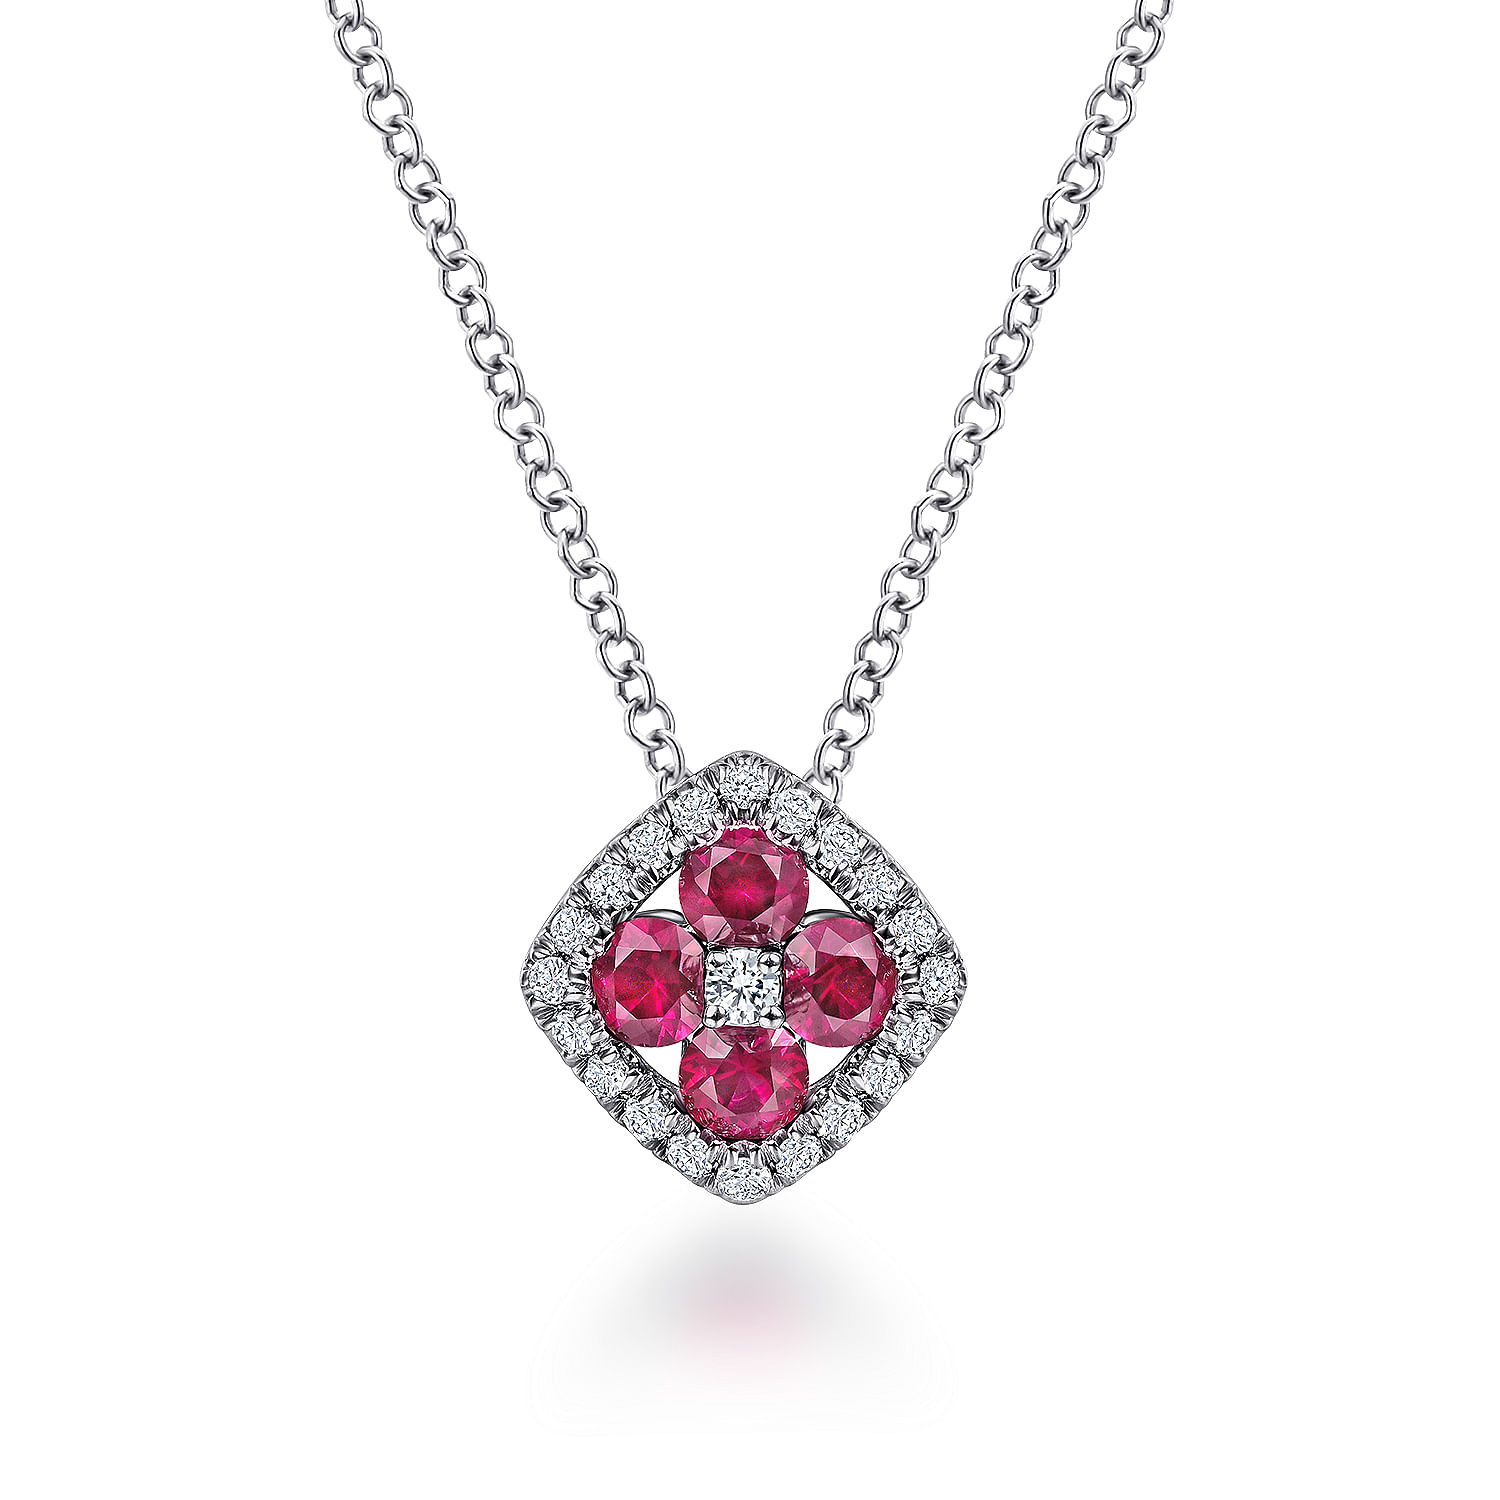 14K-White-Gold-Ruby-and-Diamond-Halo-Floral-Pendant-Necklace1